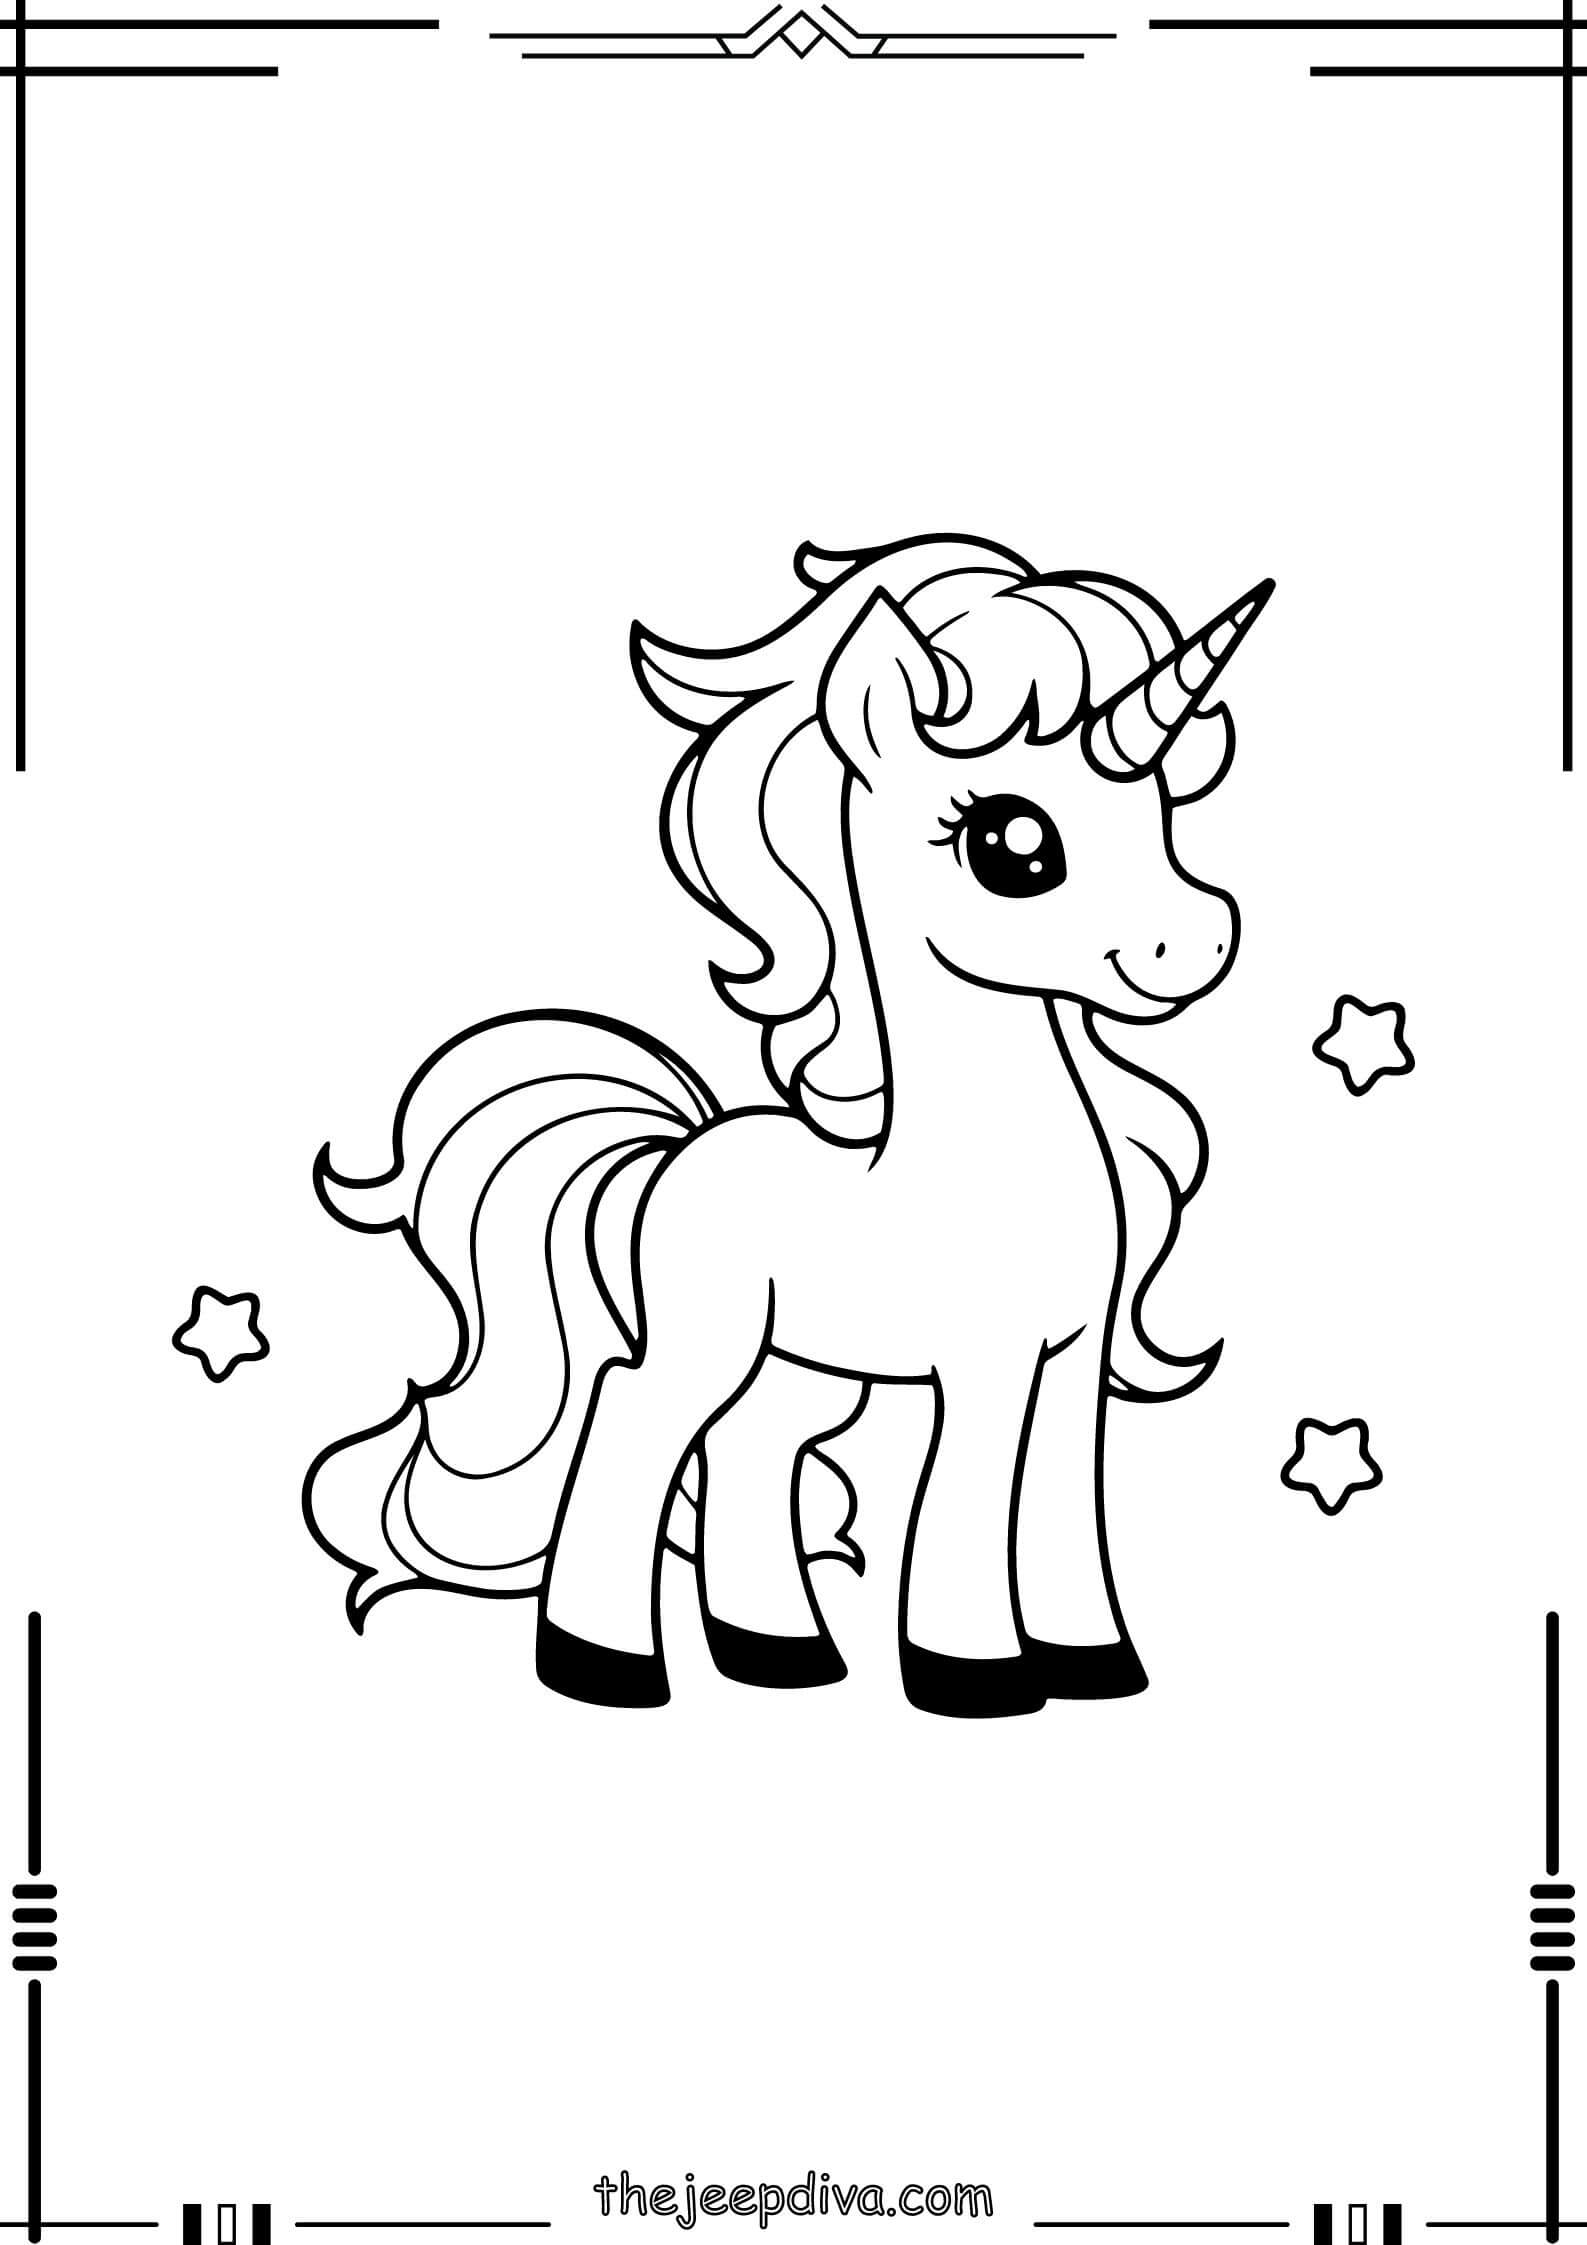 unicorn-coloring-page-easy-1